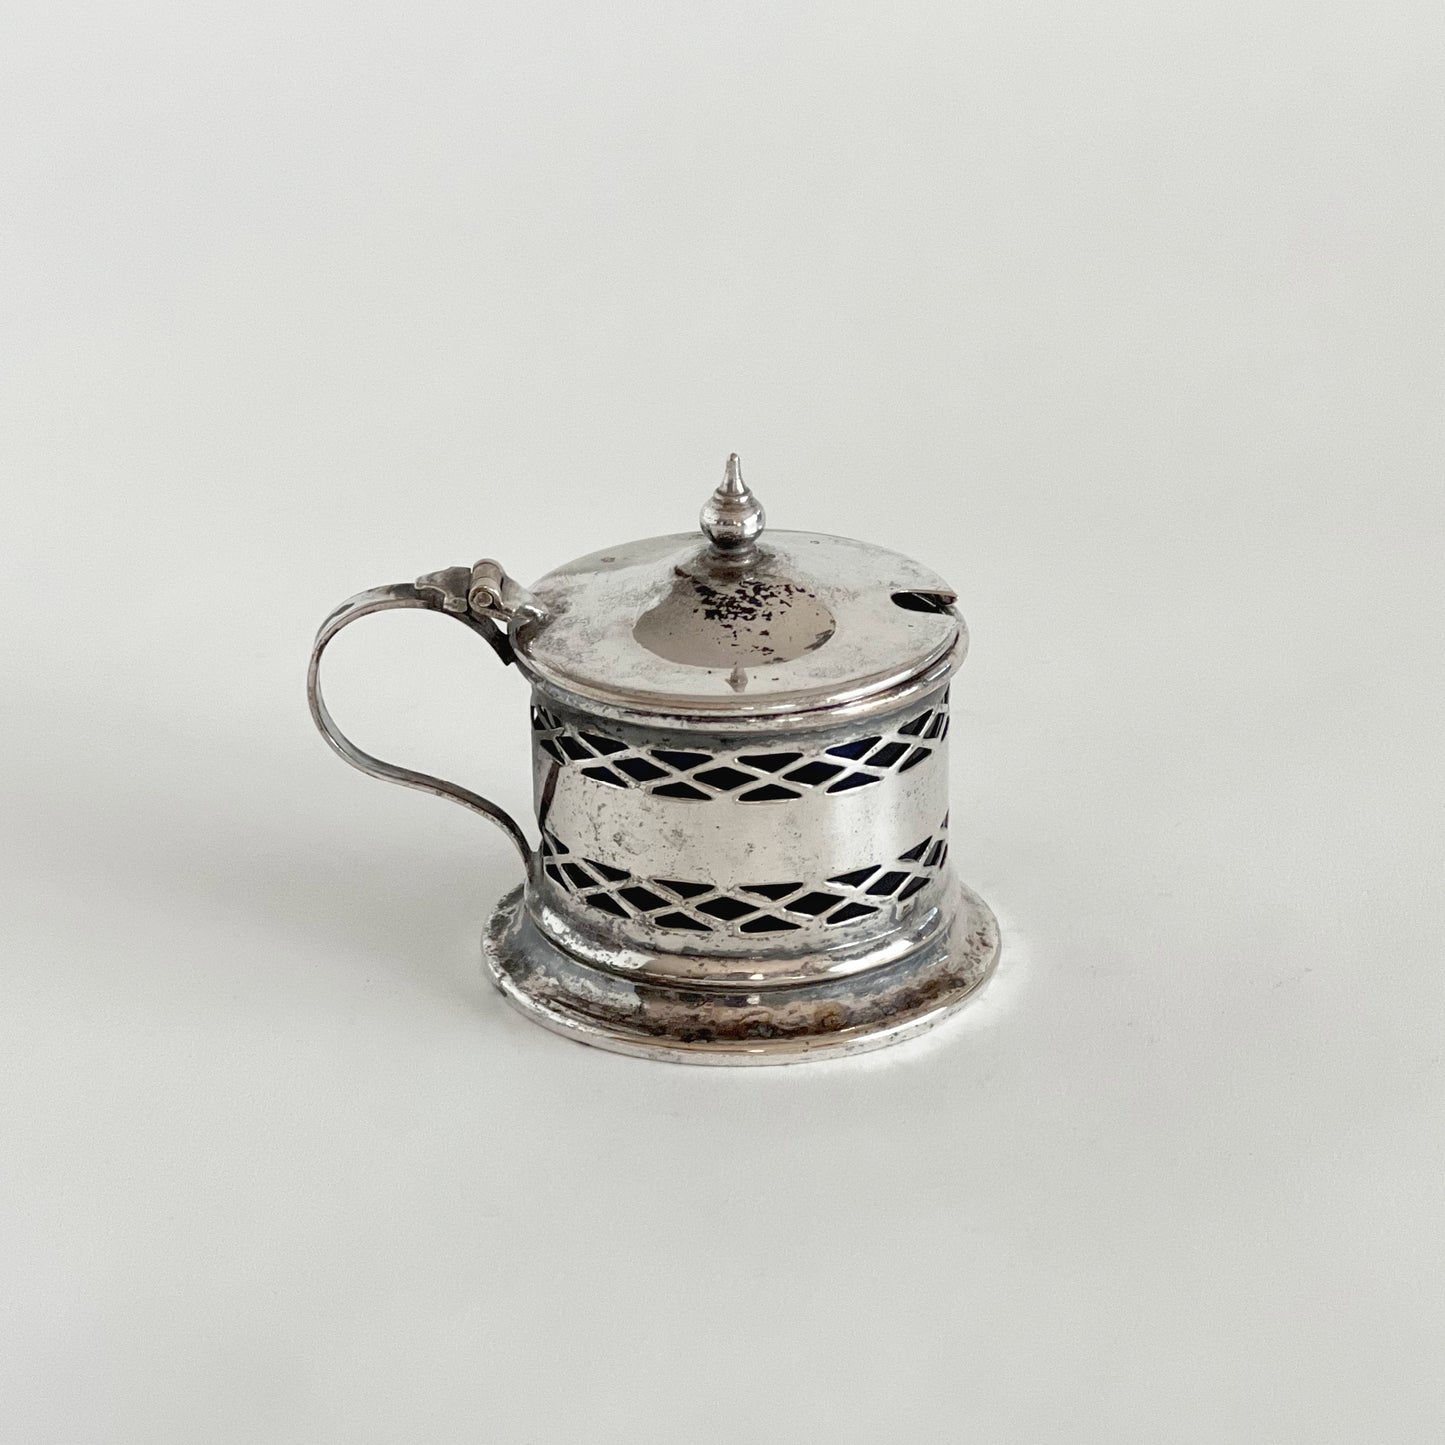 English antique silver-plated mustard pot